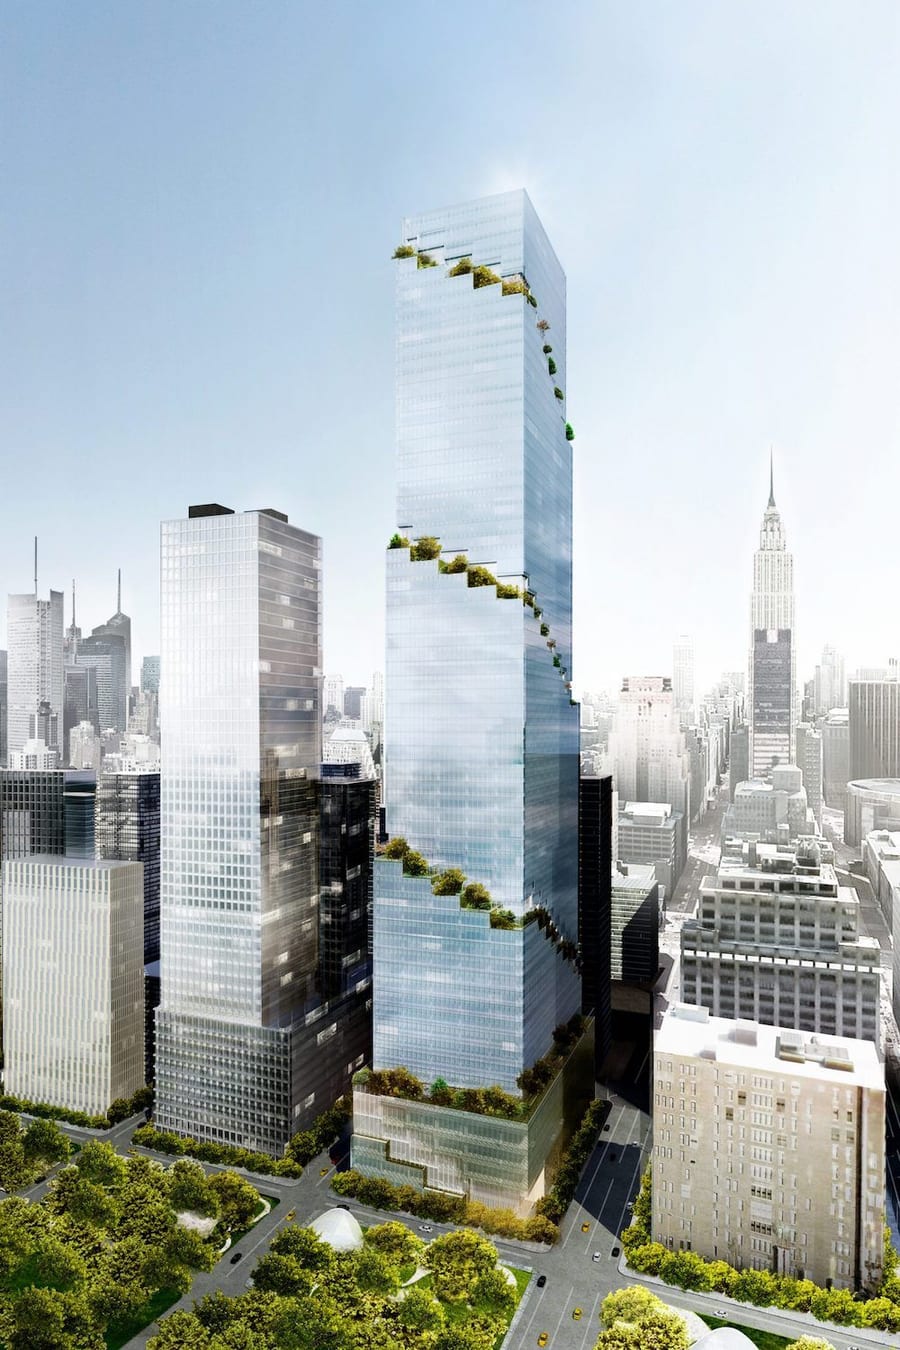 The BIG-designed Spiral Tower in New York City, set for completion in 2022.